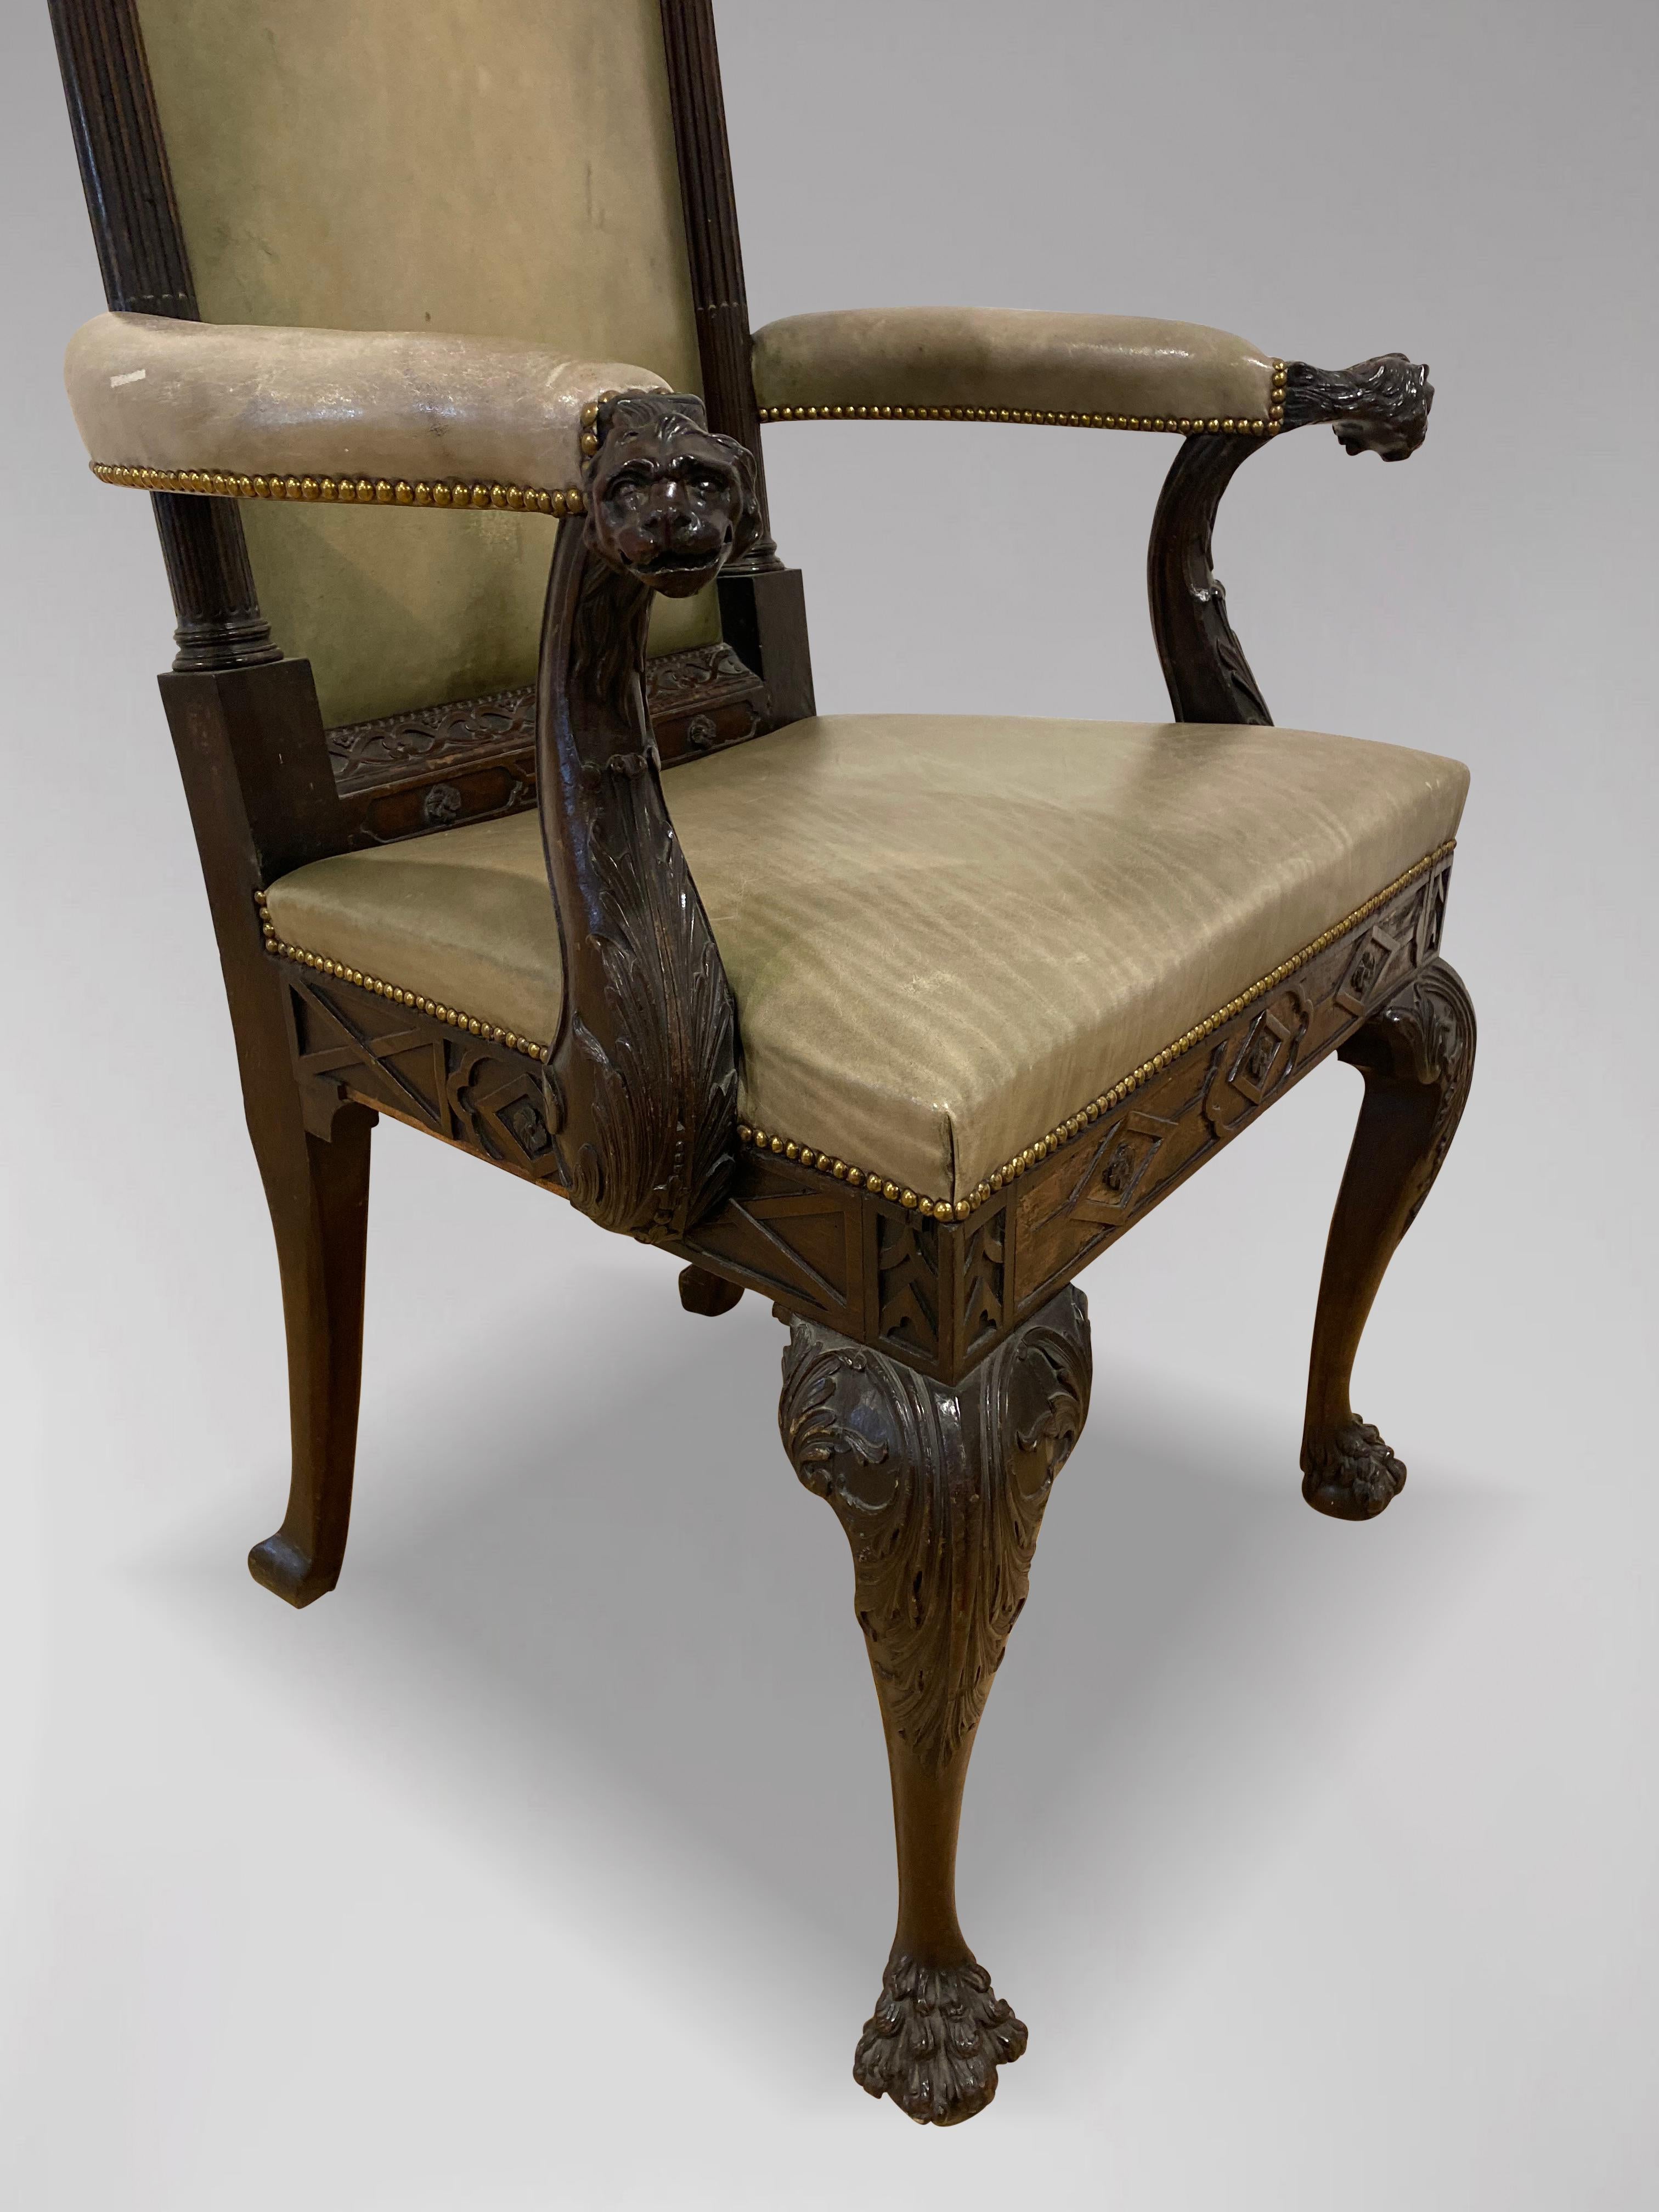 Impressive 19th Century Mahogany and Leather Masonic Throne Armchair For Sale 4